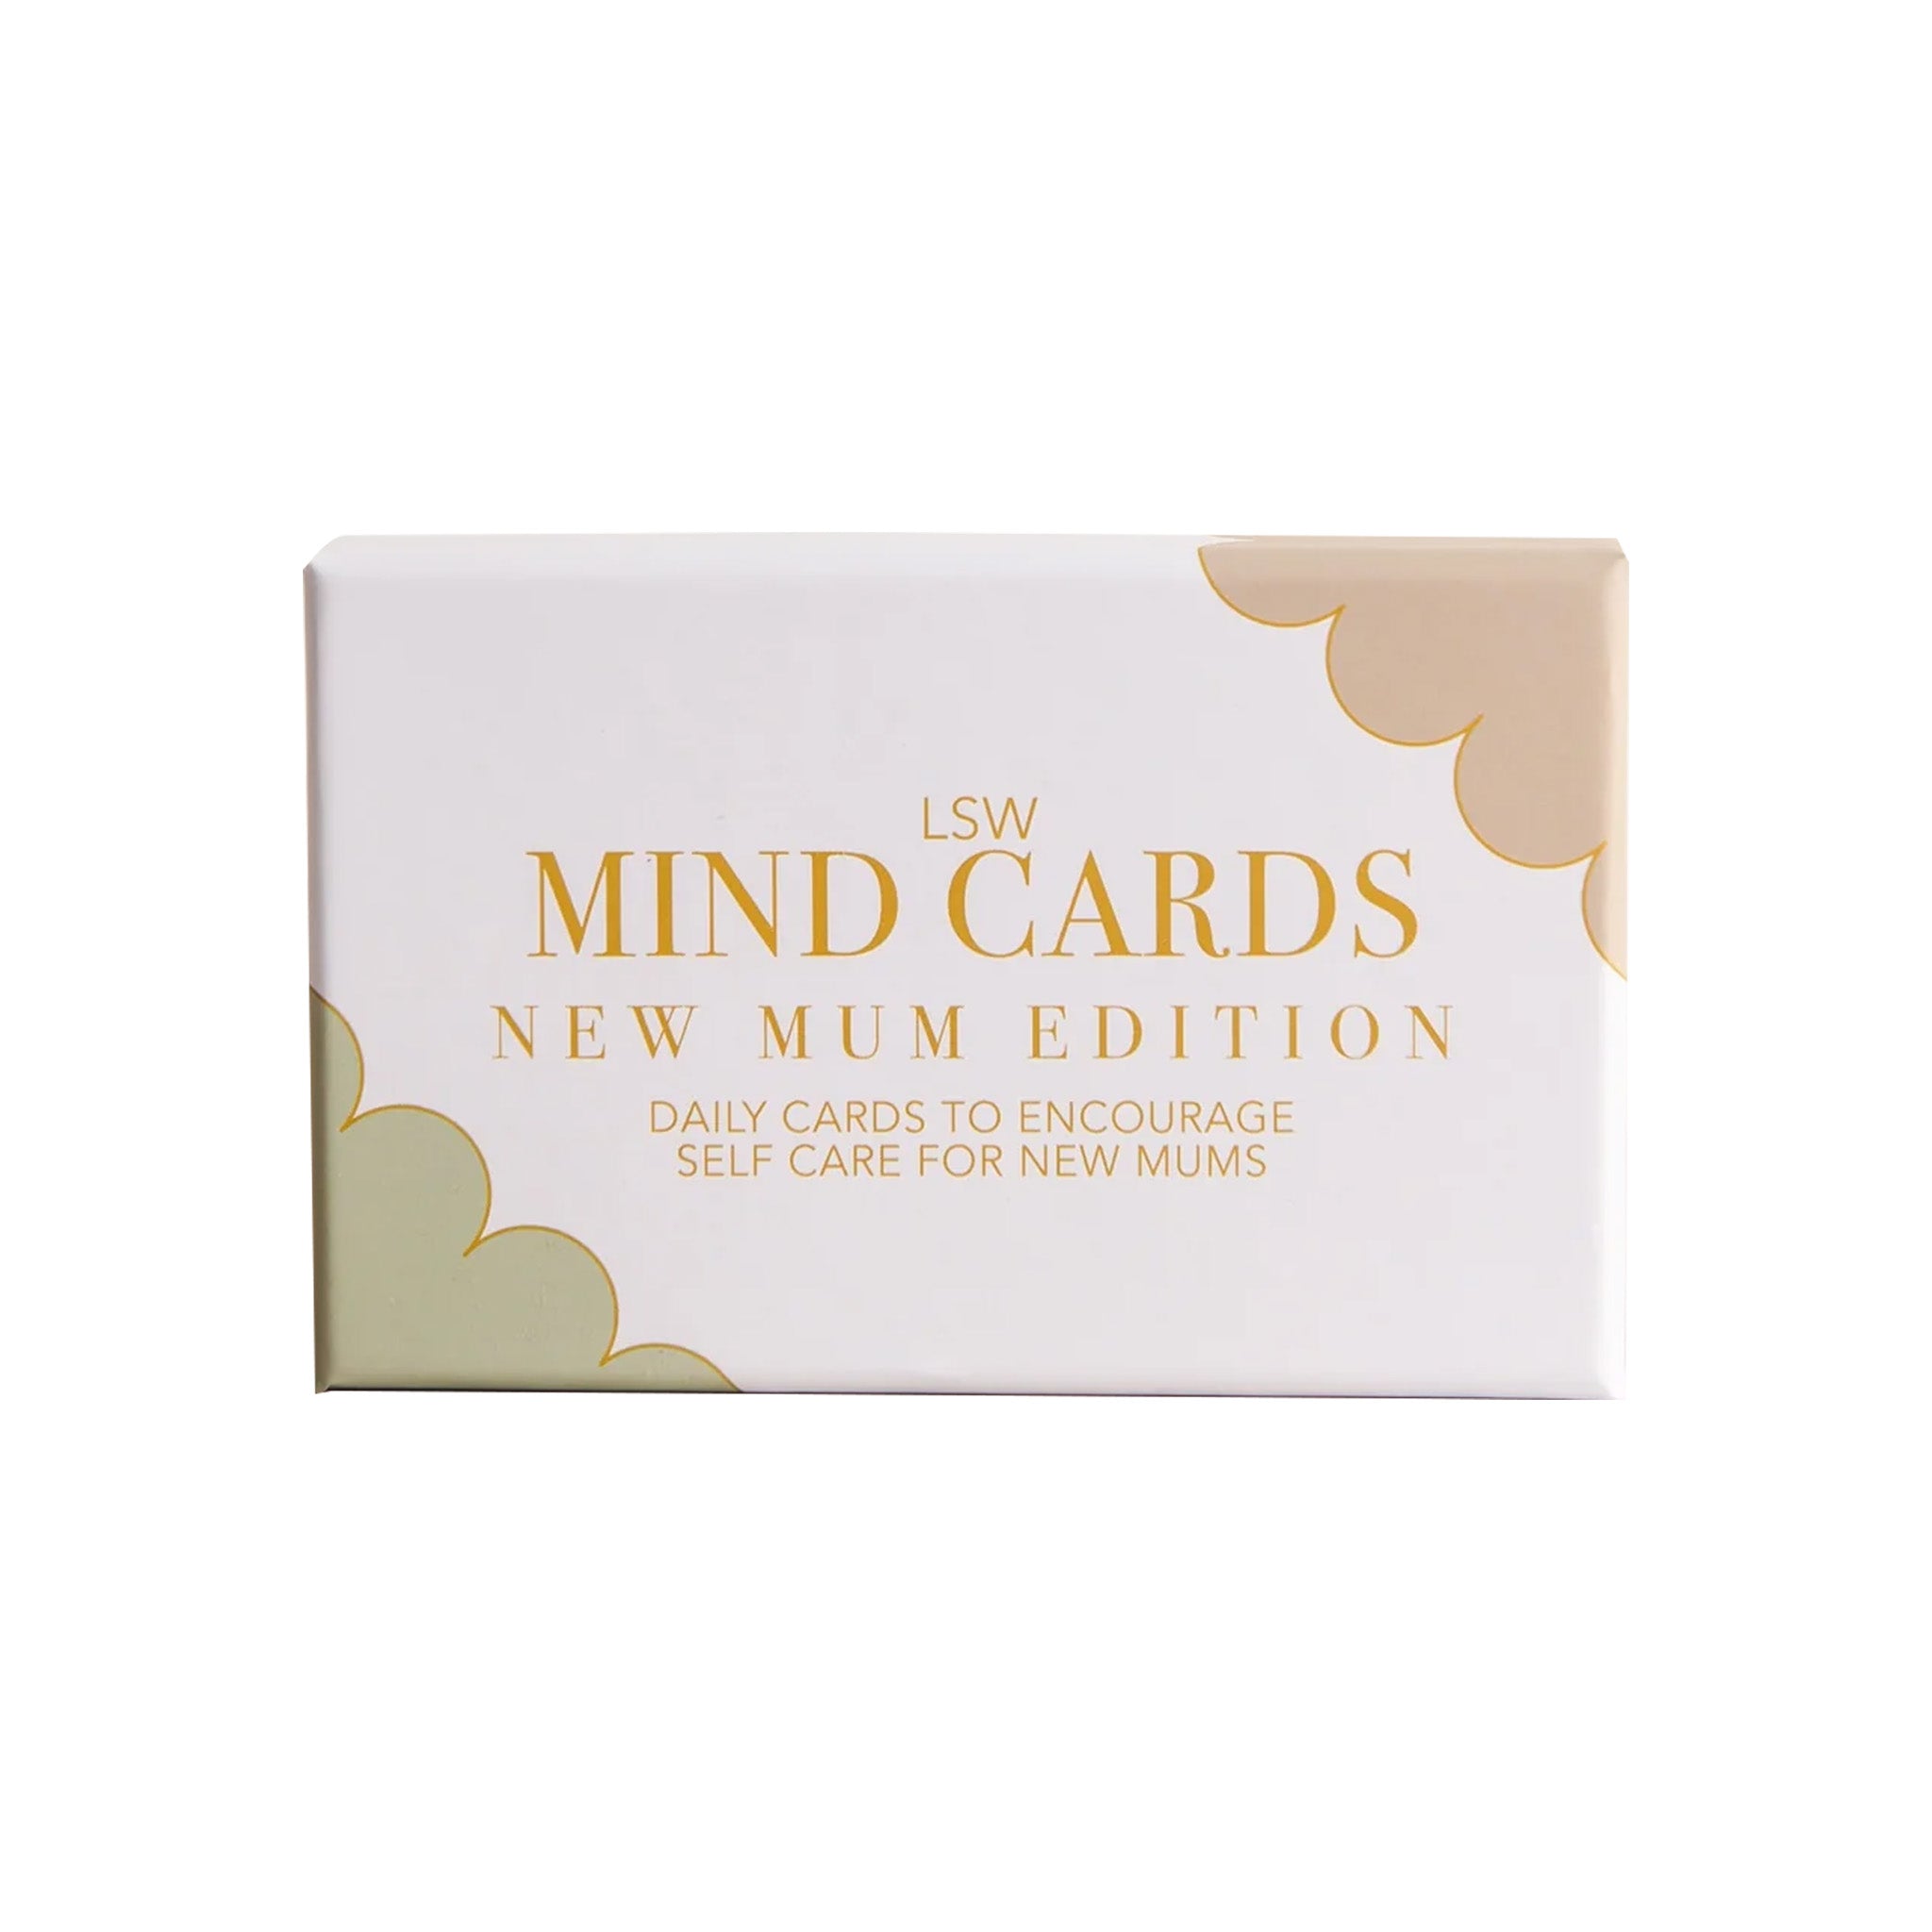 LSW Mind Cards: New Mum Edition